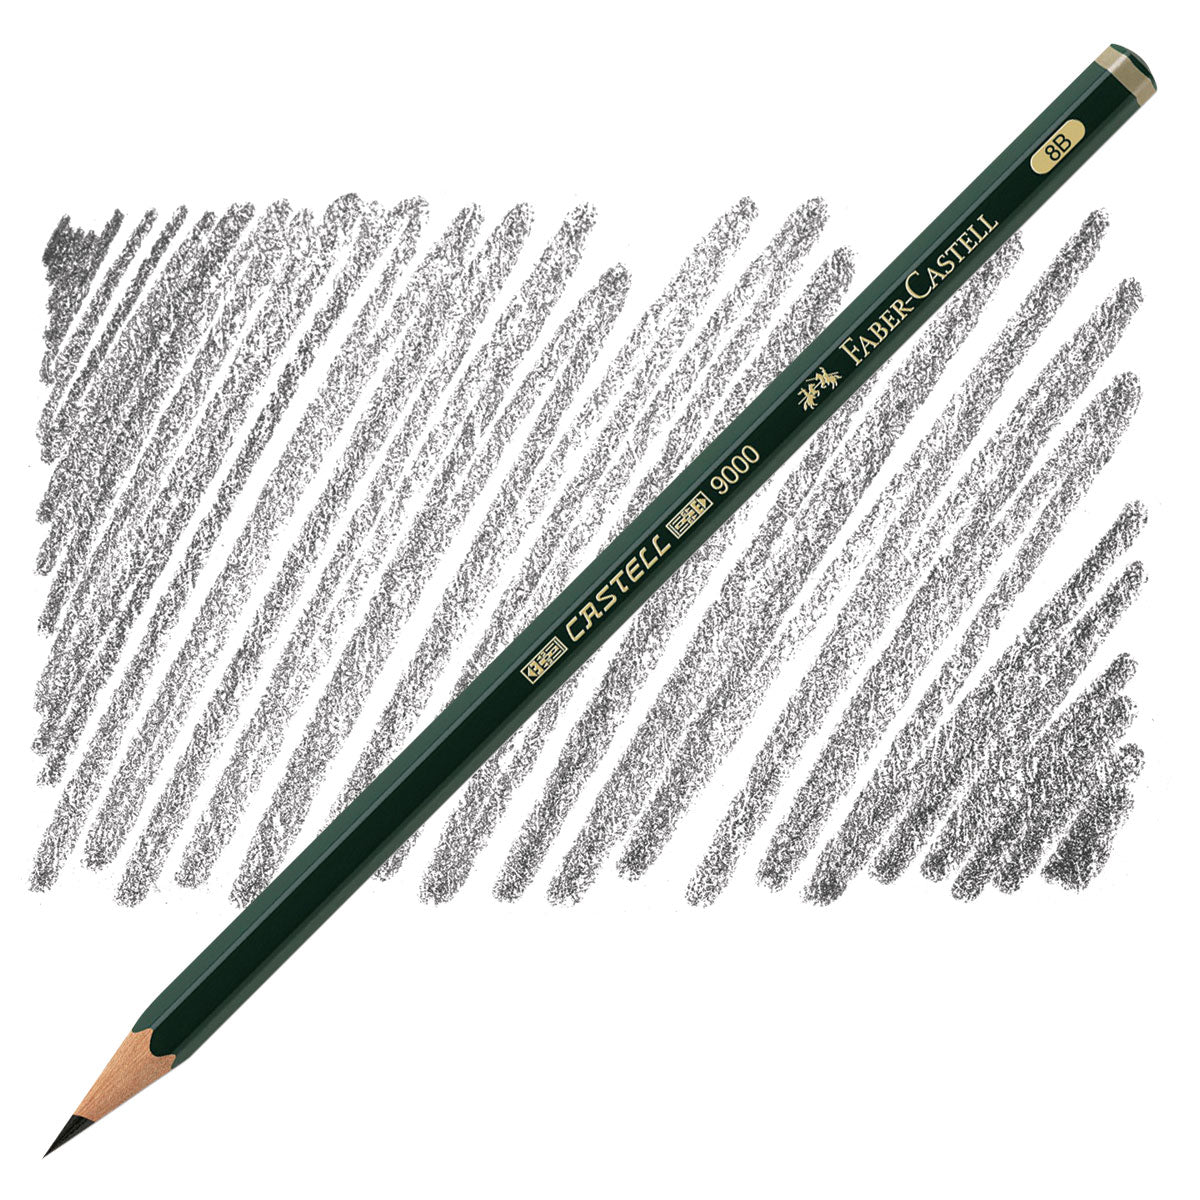 Faber Castell #8B Extra Dark Pencil - My Tools for Living℠ Retail Store